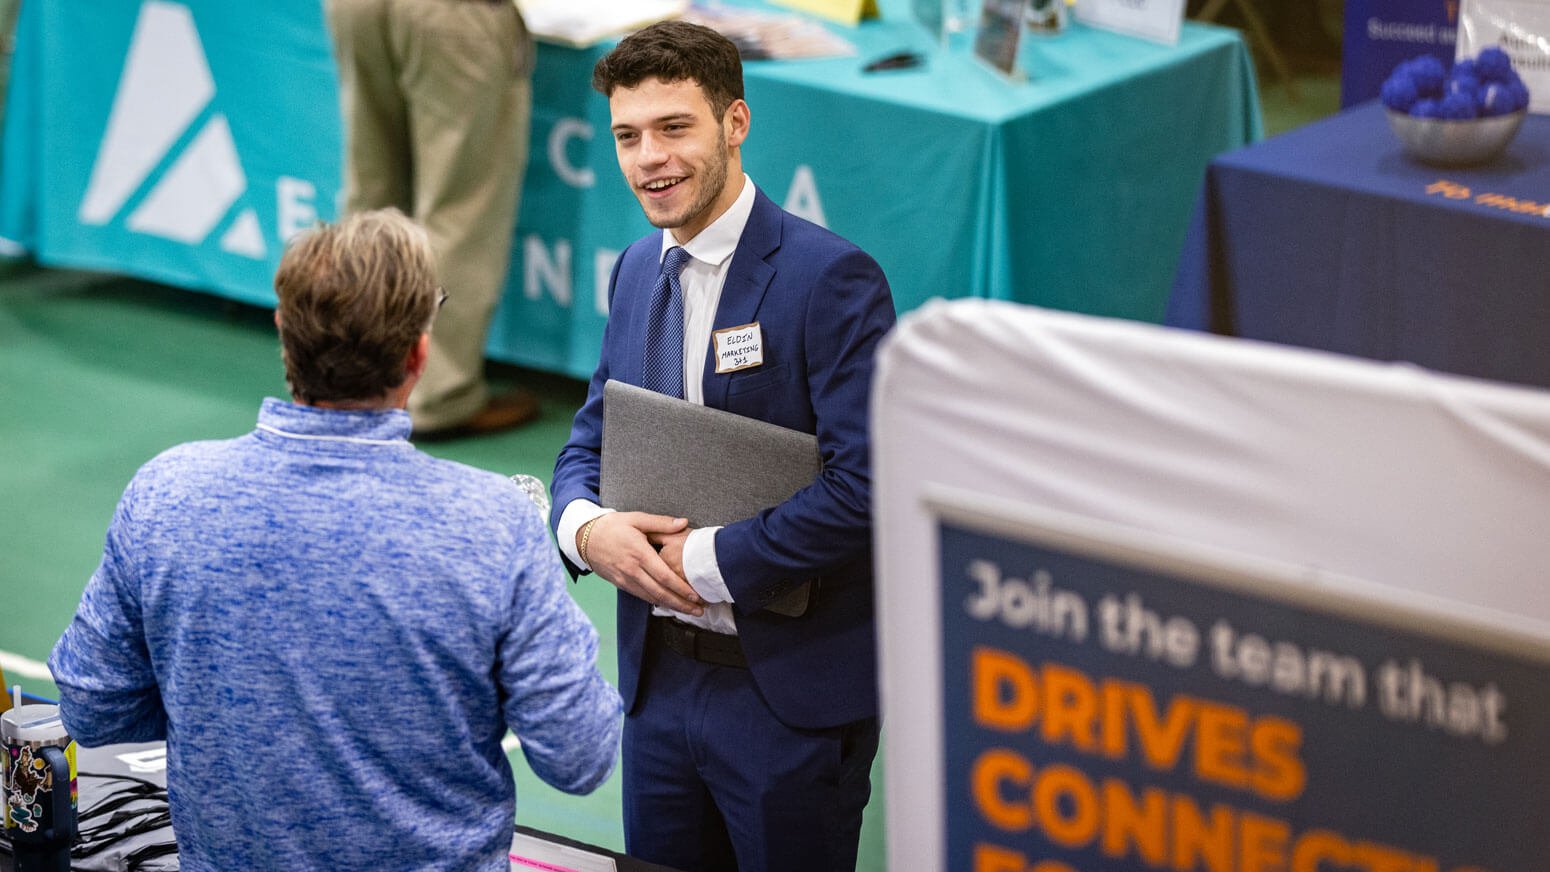 Students interact with brand representatives during the University career fair.